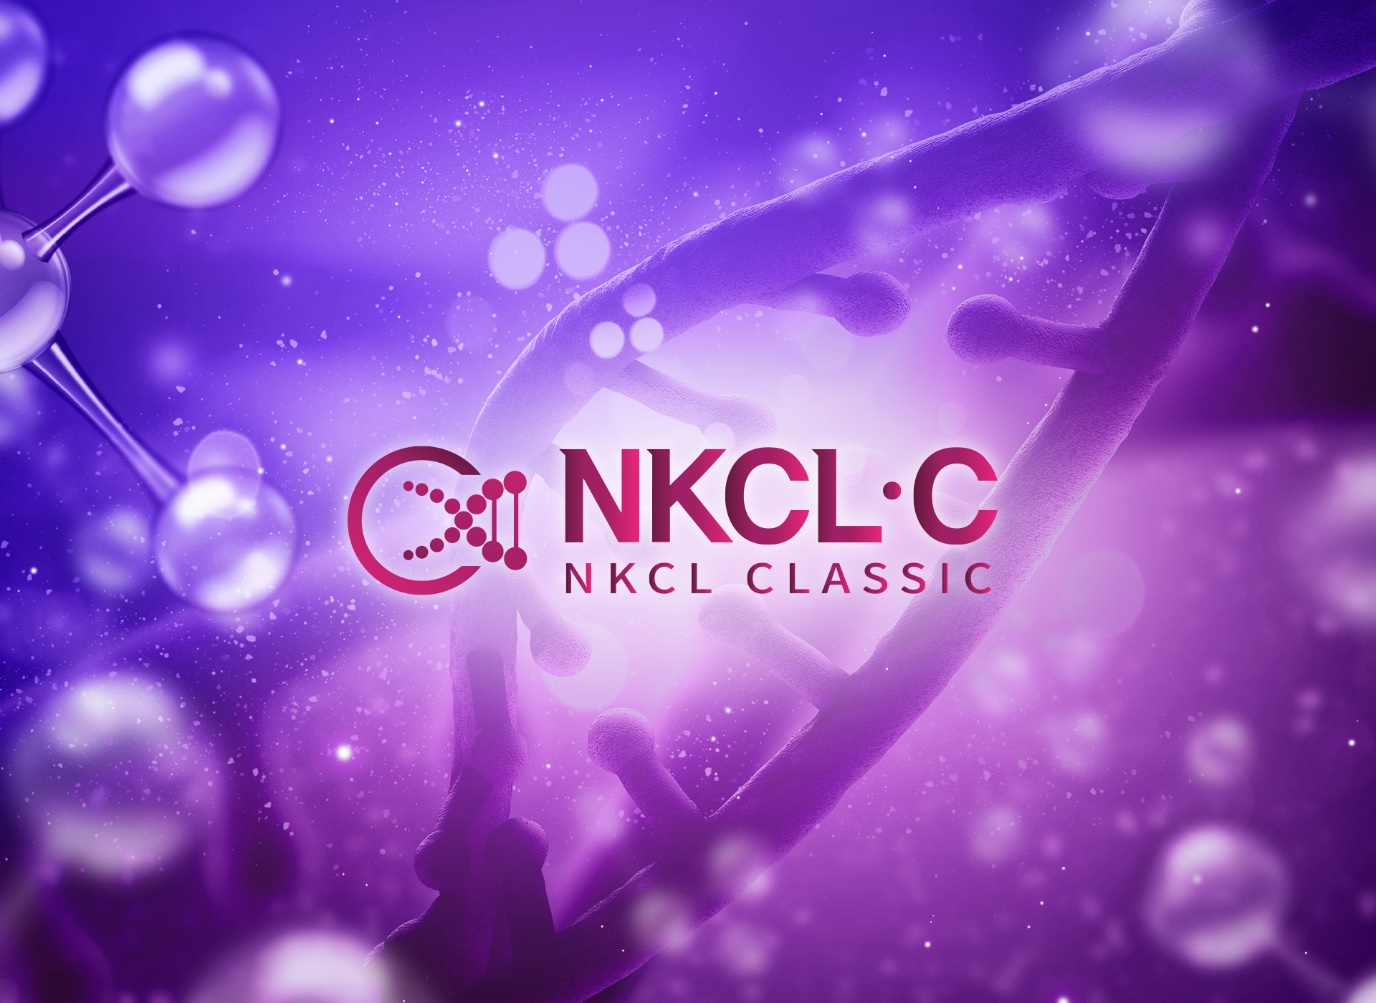 NKCL, Thursday, September 9, 2021, Press release picture